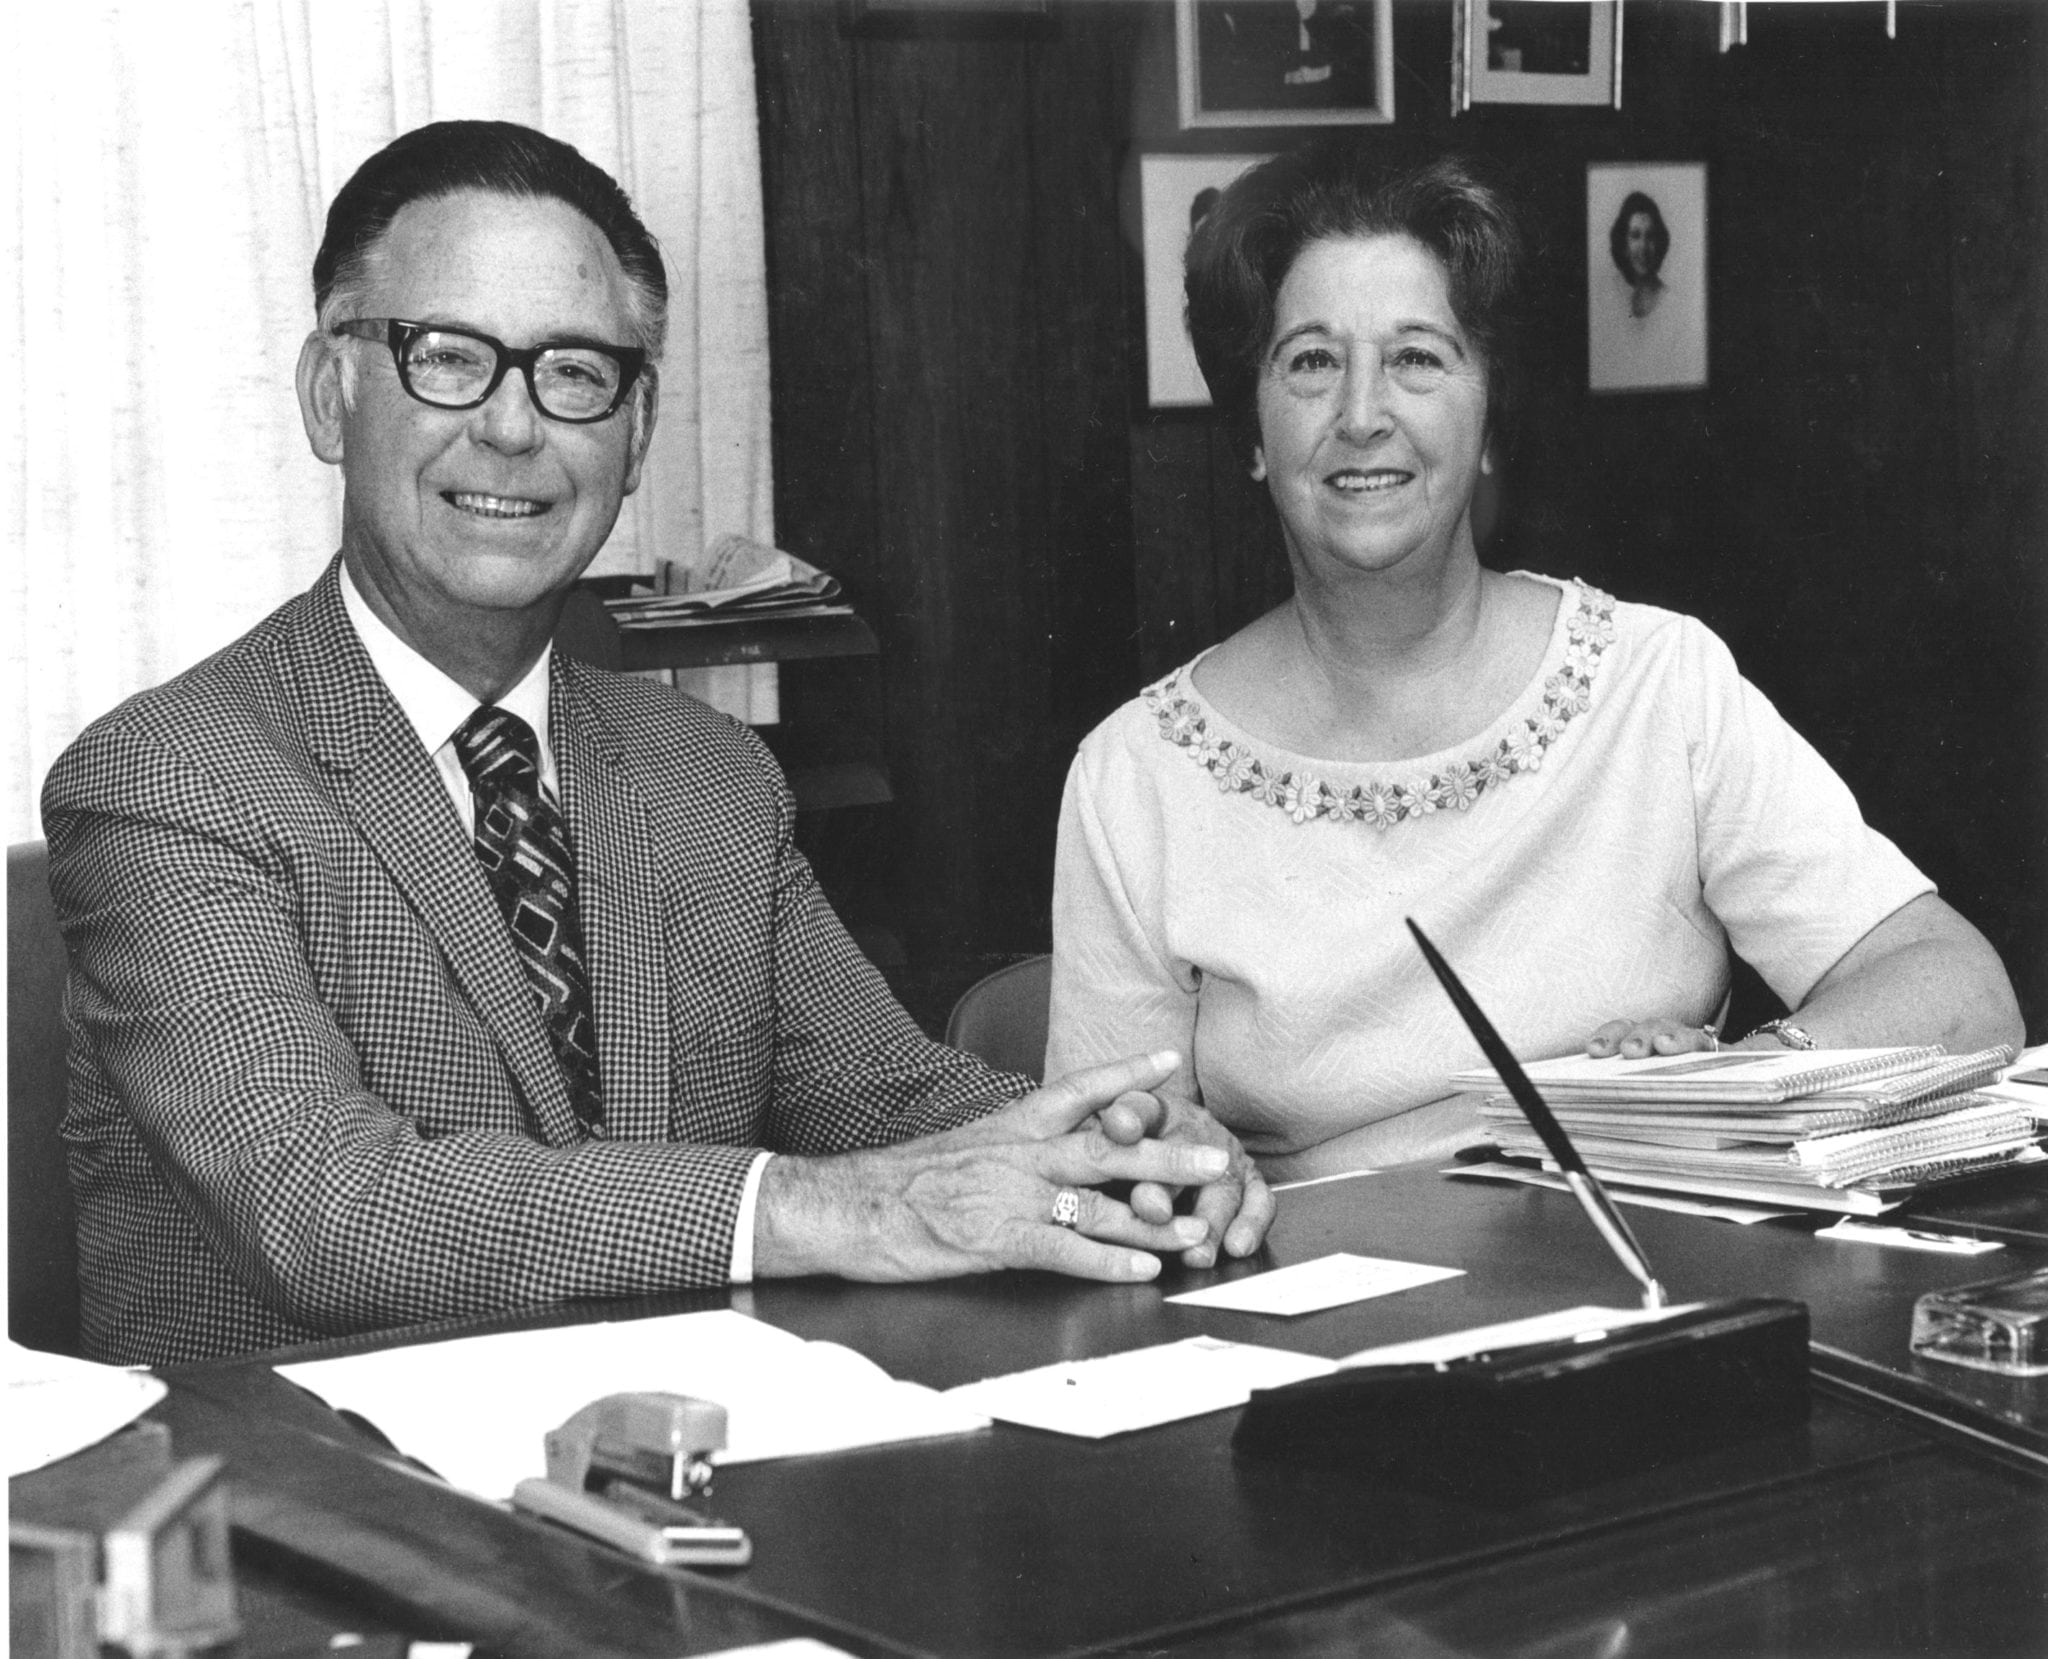 Ed and Marge Bridges seated together at a desk in an office.